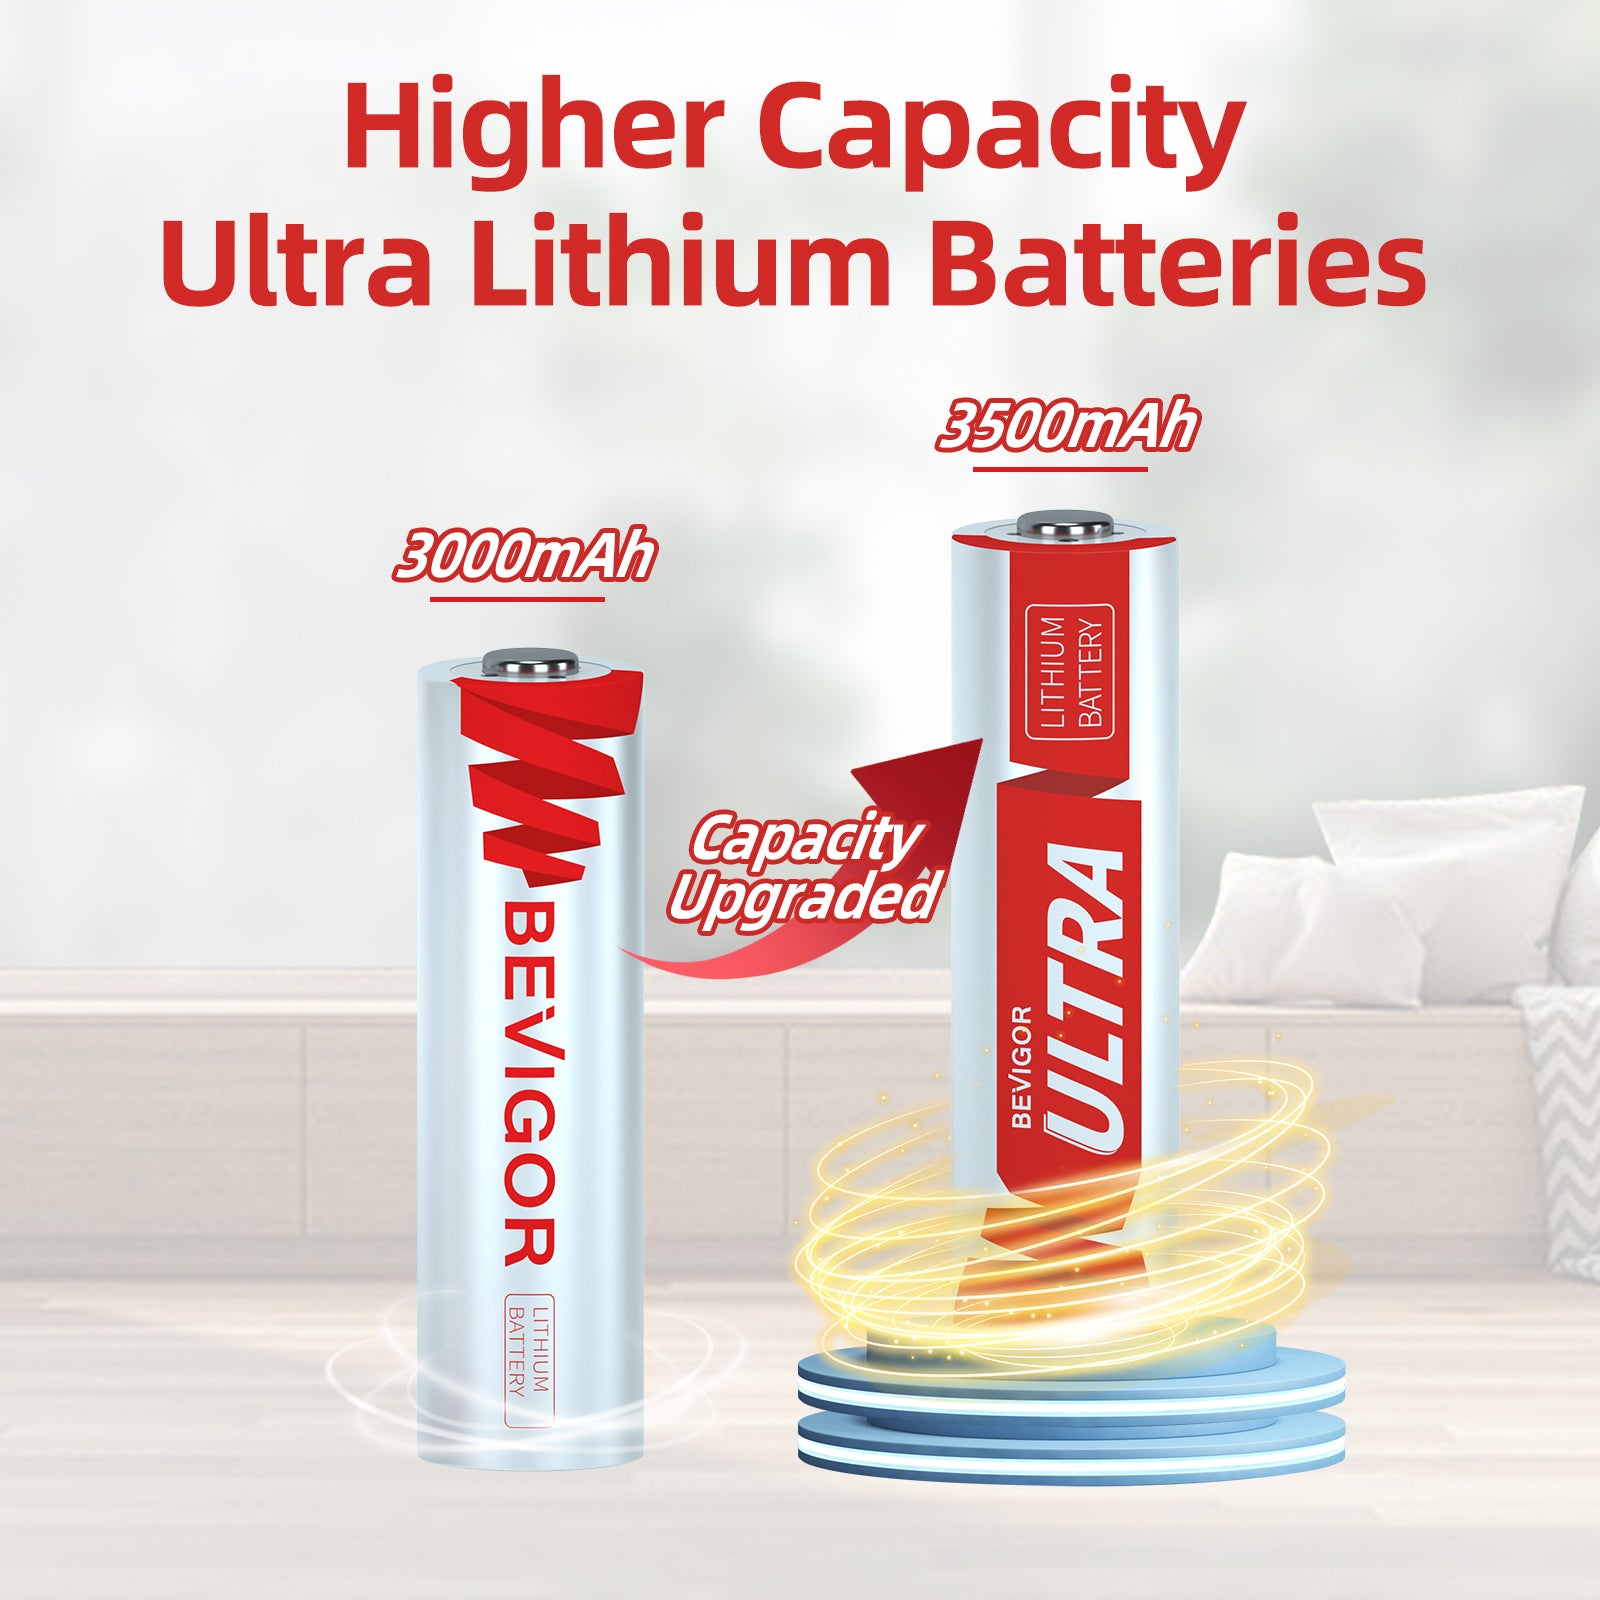 ULTRA #NEW Bevigor Lithium AA Batteries 8Pack 1.5V 3500mAh 【Non-Rechargeable】